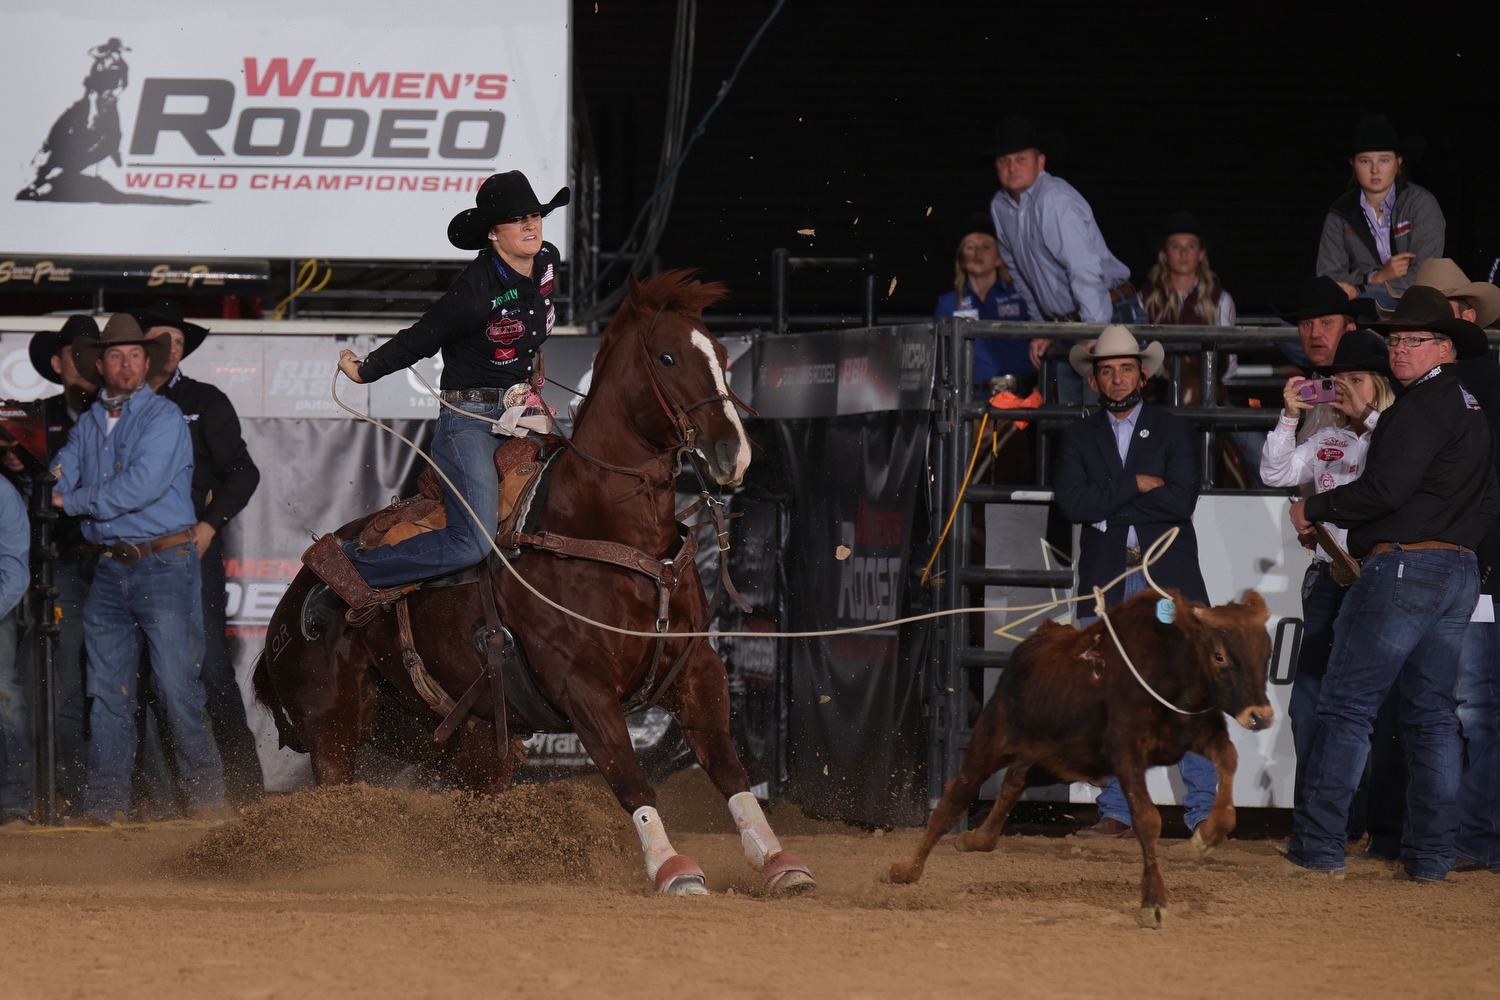 Boisjoli Crowned Women’s Rodeo World Championship All-around Cowgirl